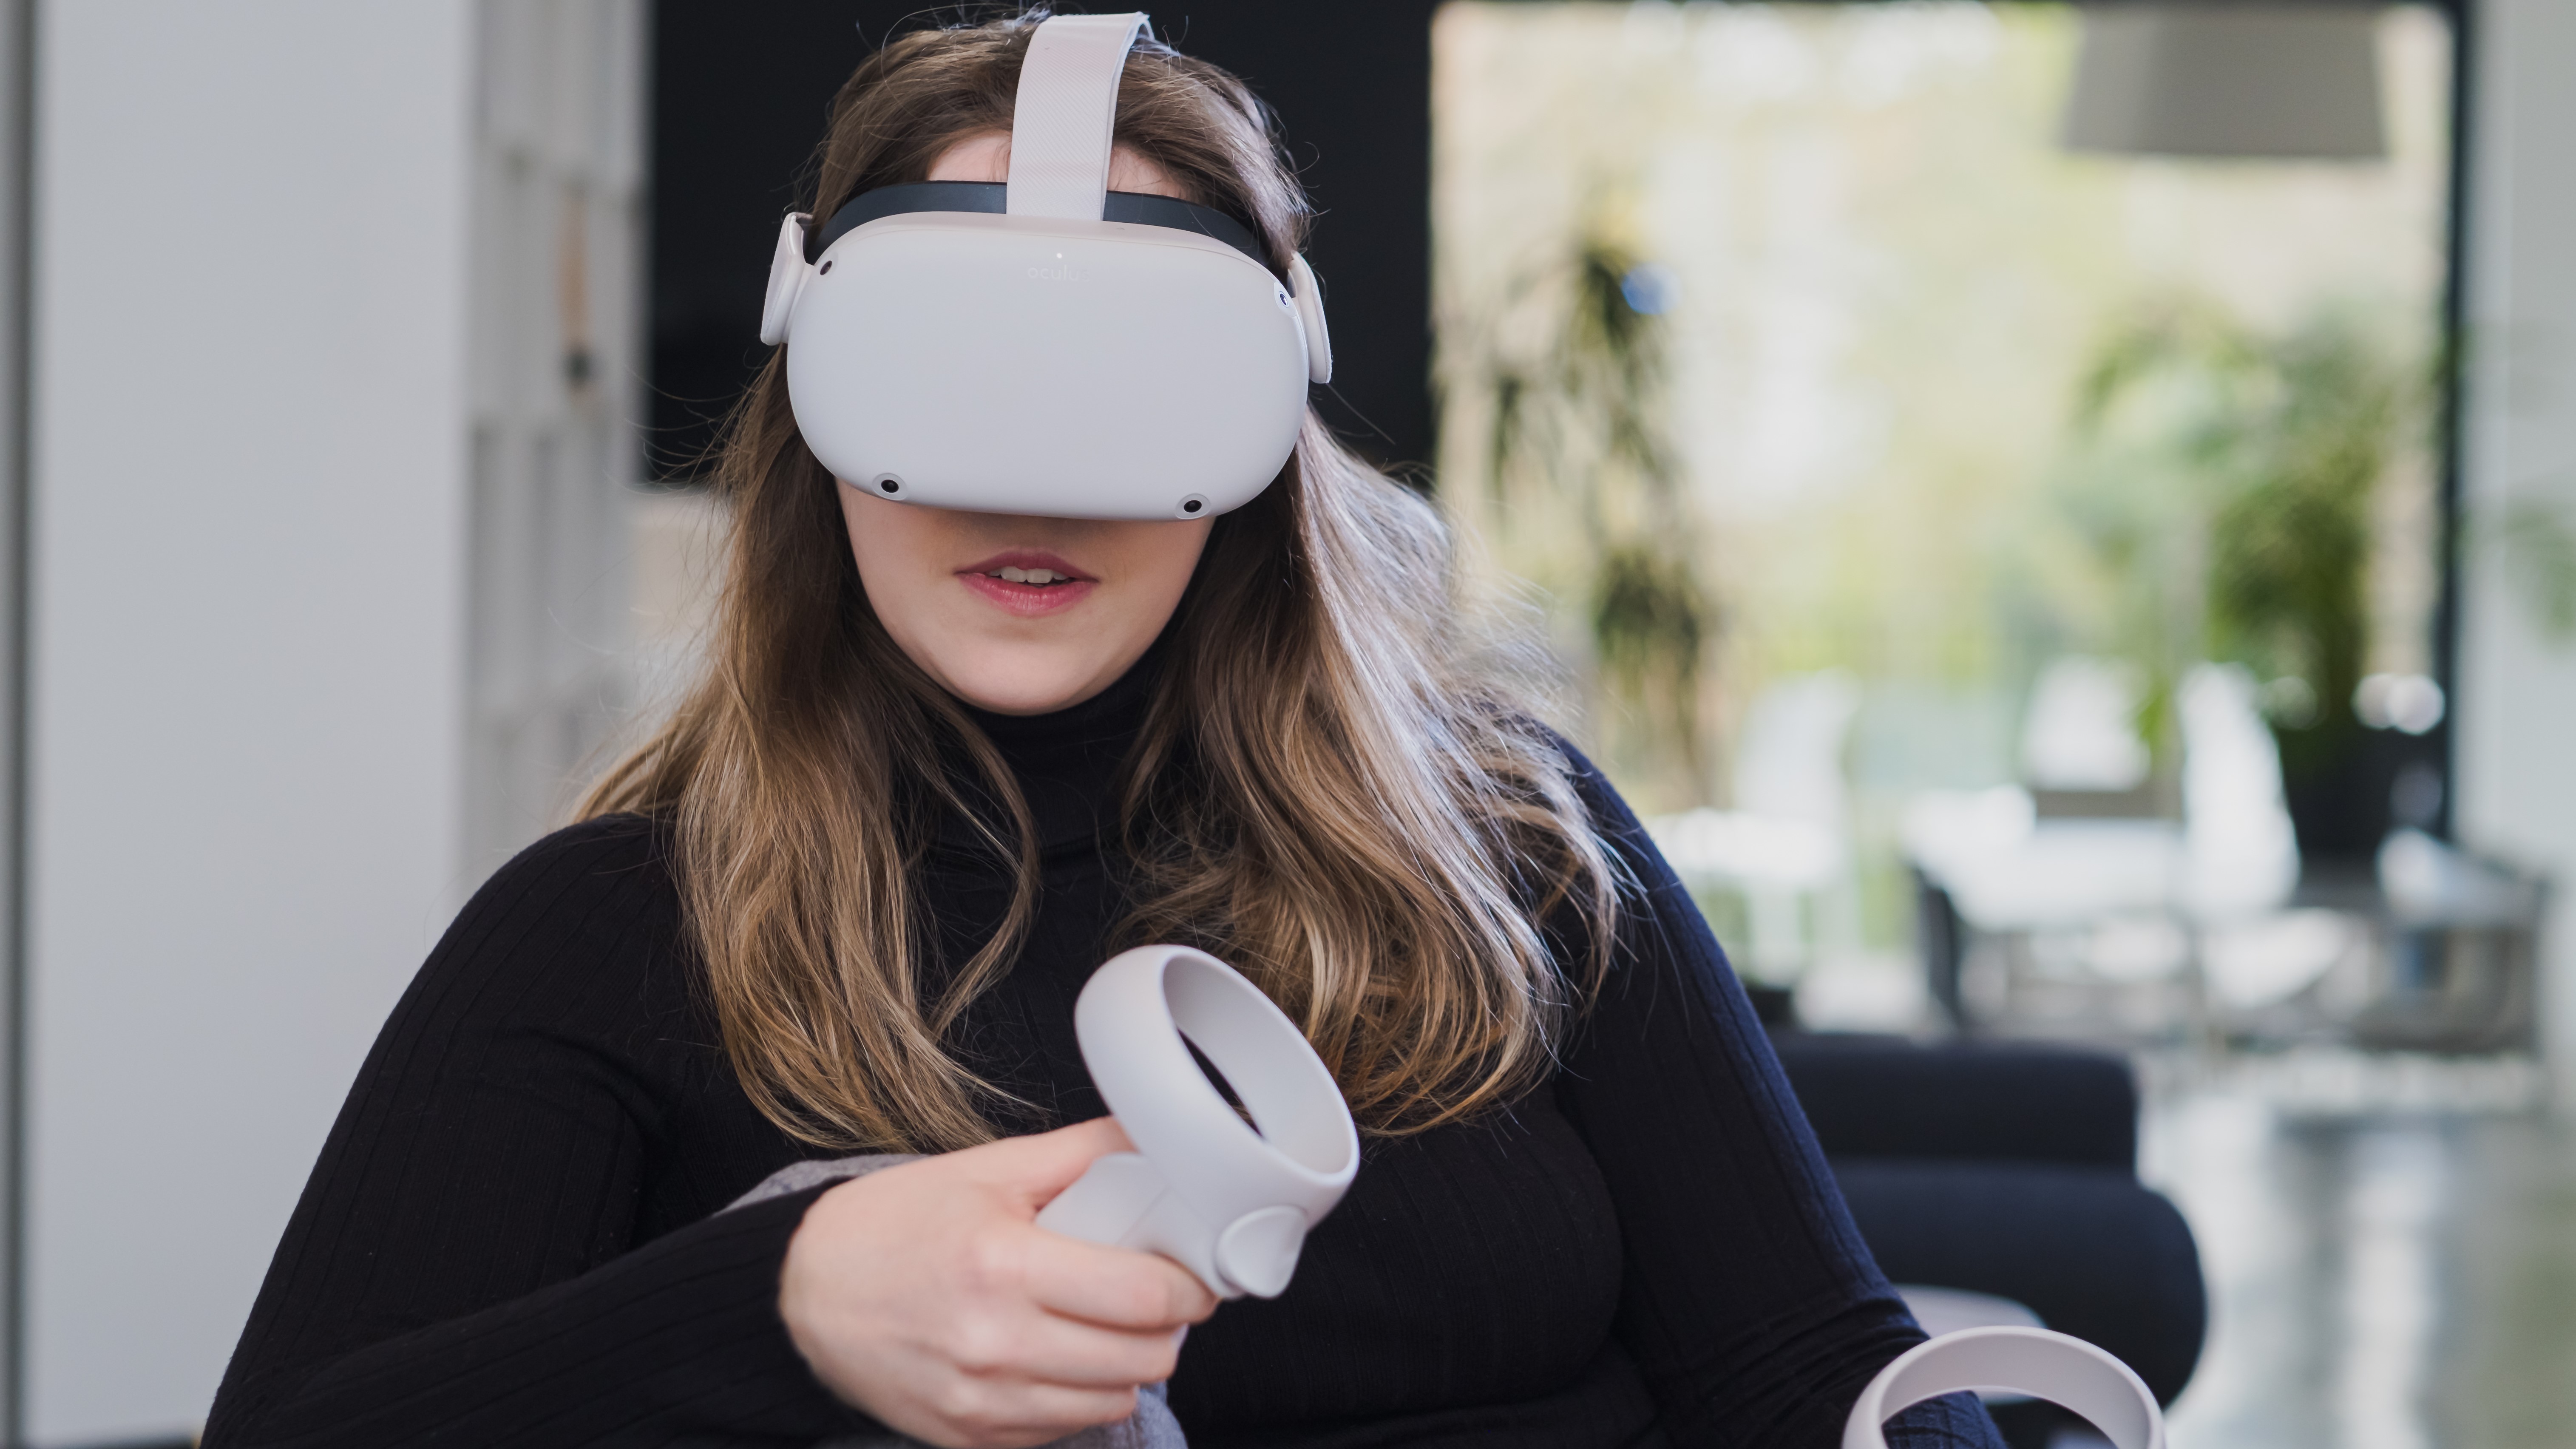 A person sat on a couch while wearing an Oculus Quest 2 headset